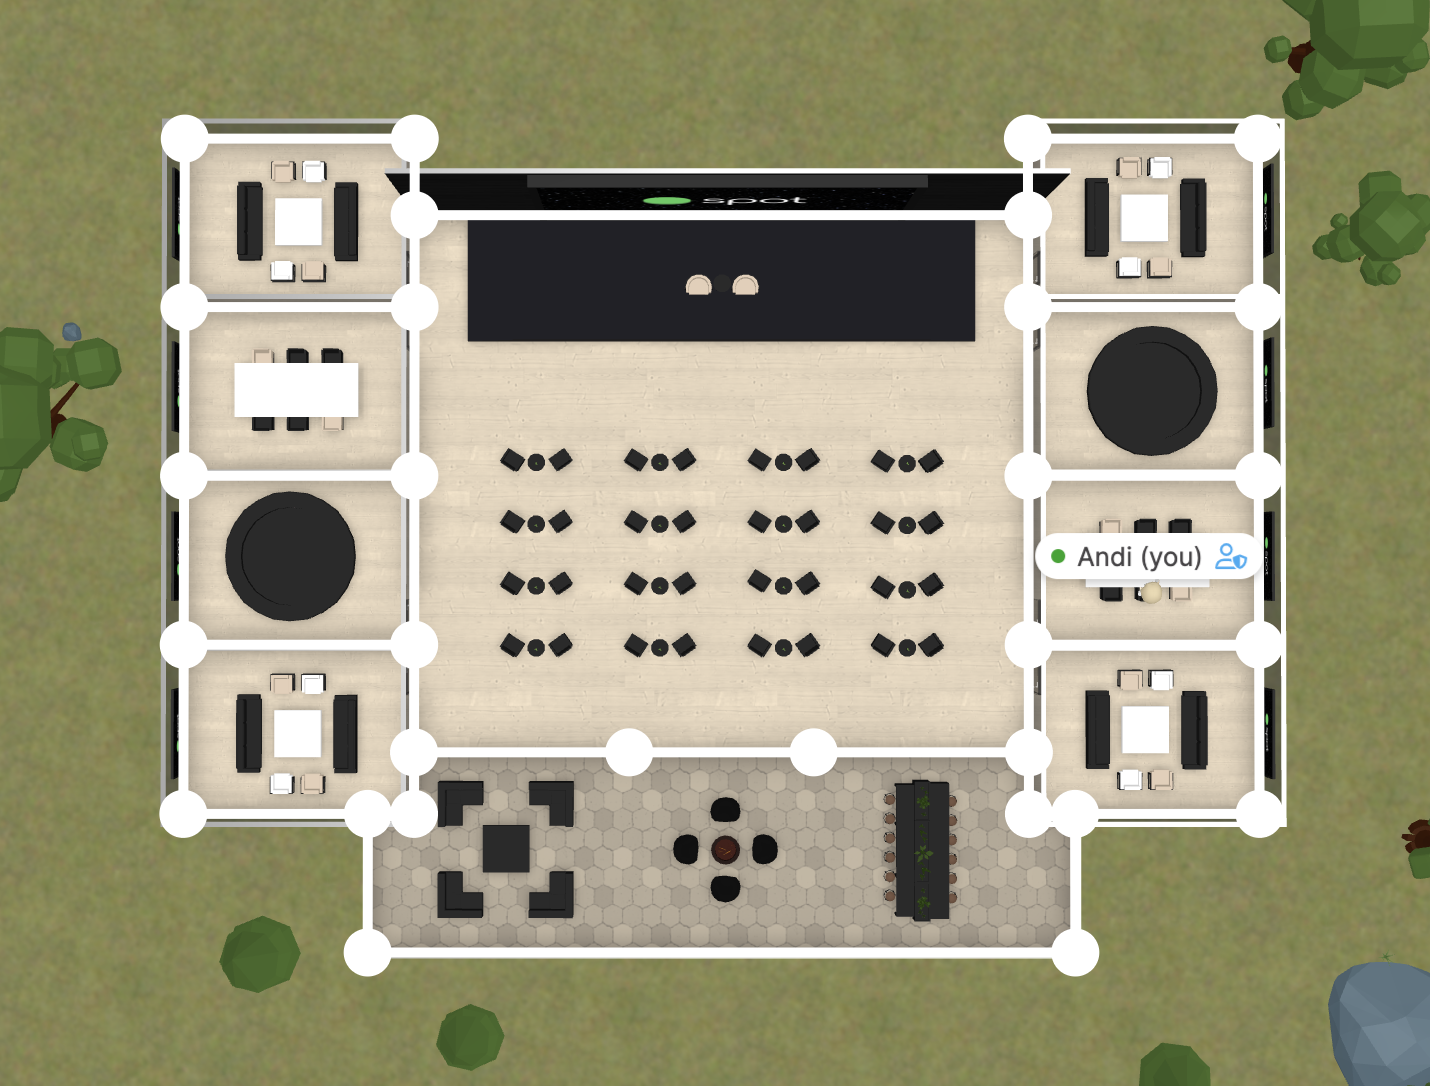 Floorplan editor of an event space